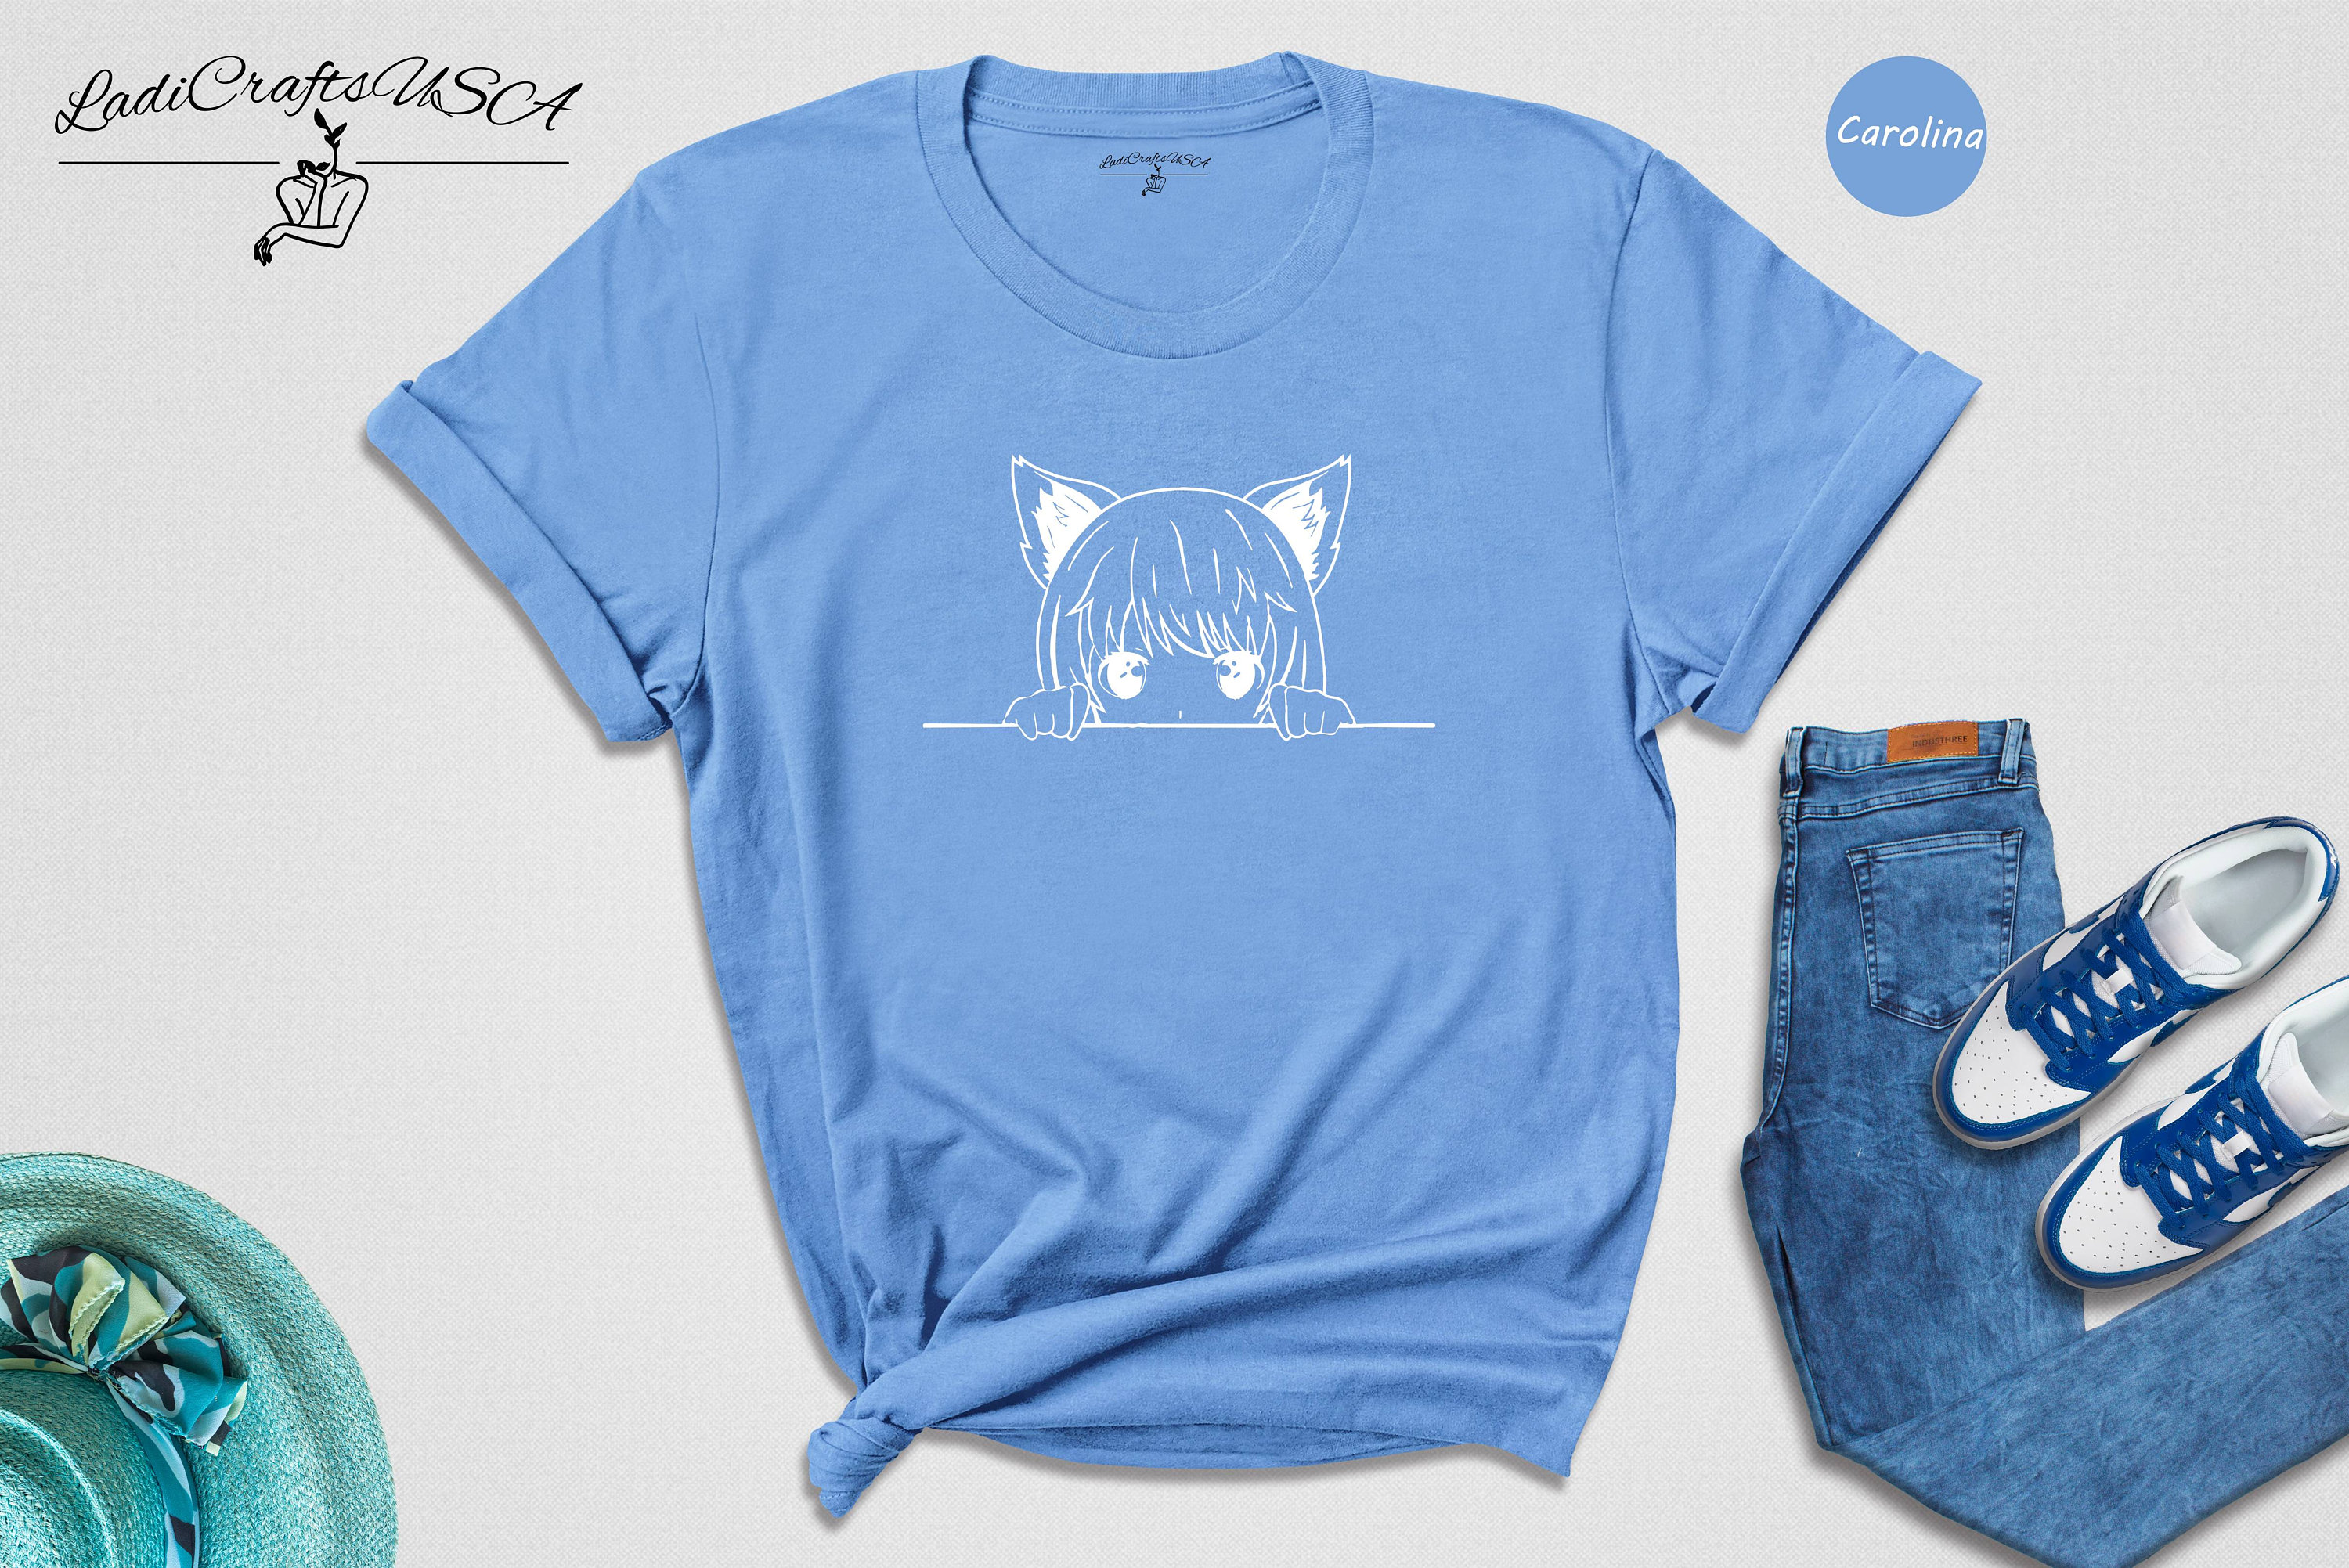 Support Catgirl Research - Anime Catgirl Meme Funny Shirt Magnet for Sale  by FloridaManCo